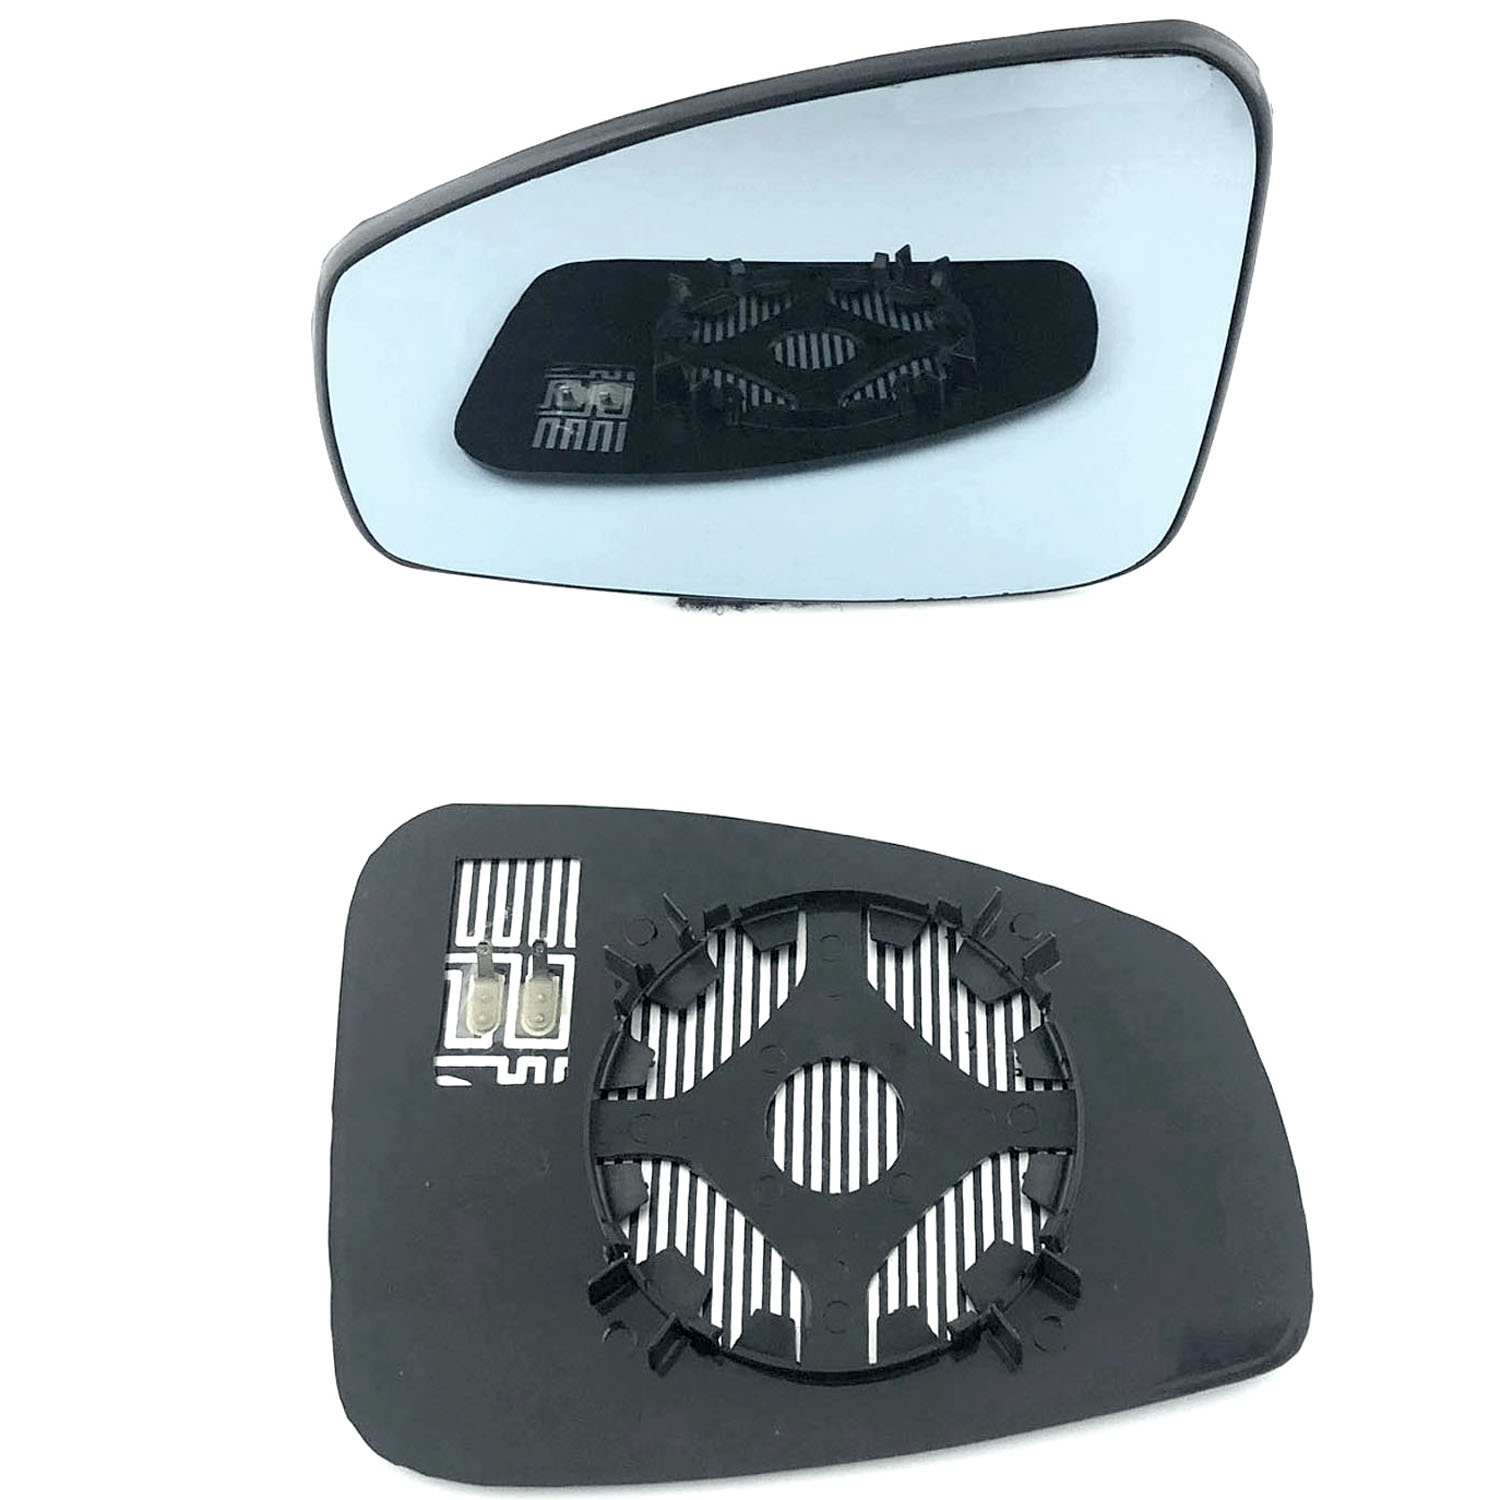 Renault Megane Wing Mirror Glass With Base LEFT HAND ( UK Passenger Side ) 2008 to 2015 – Heated Base Convex Mirror